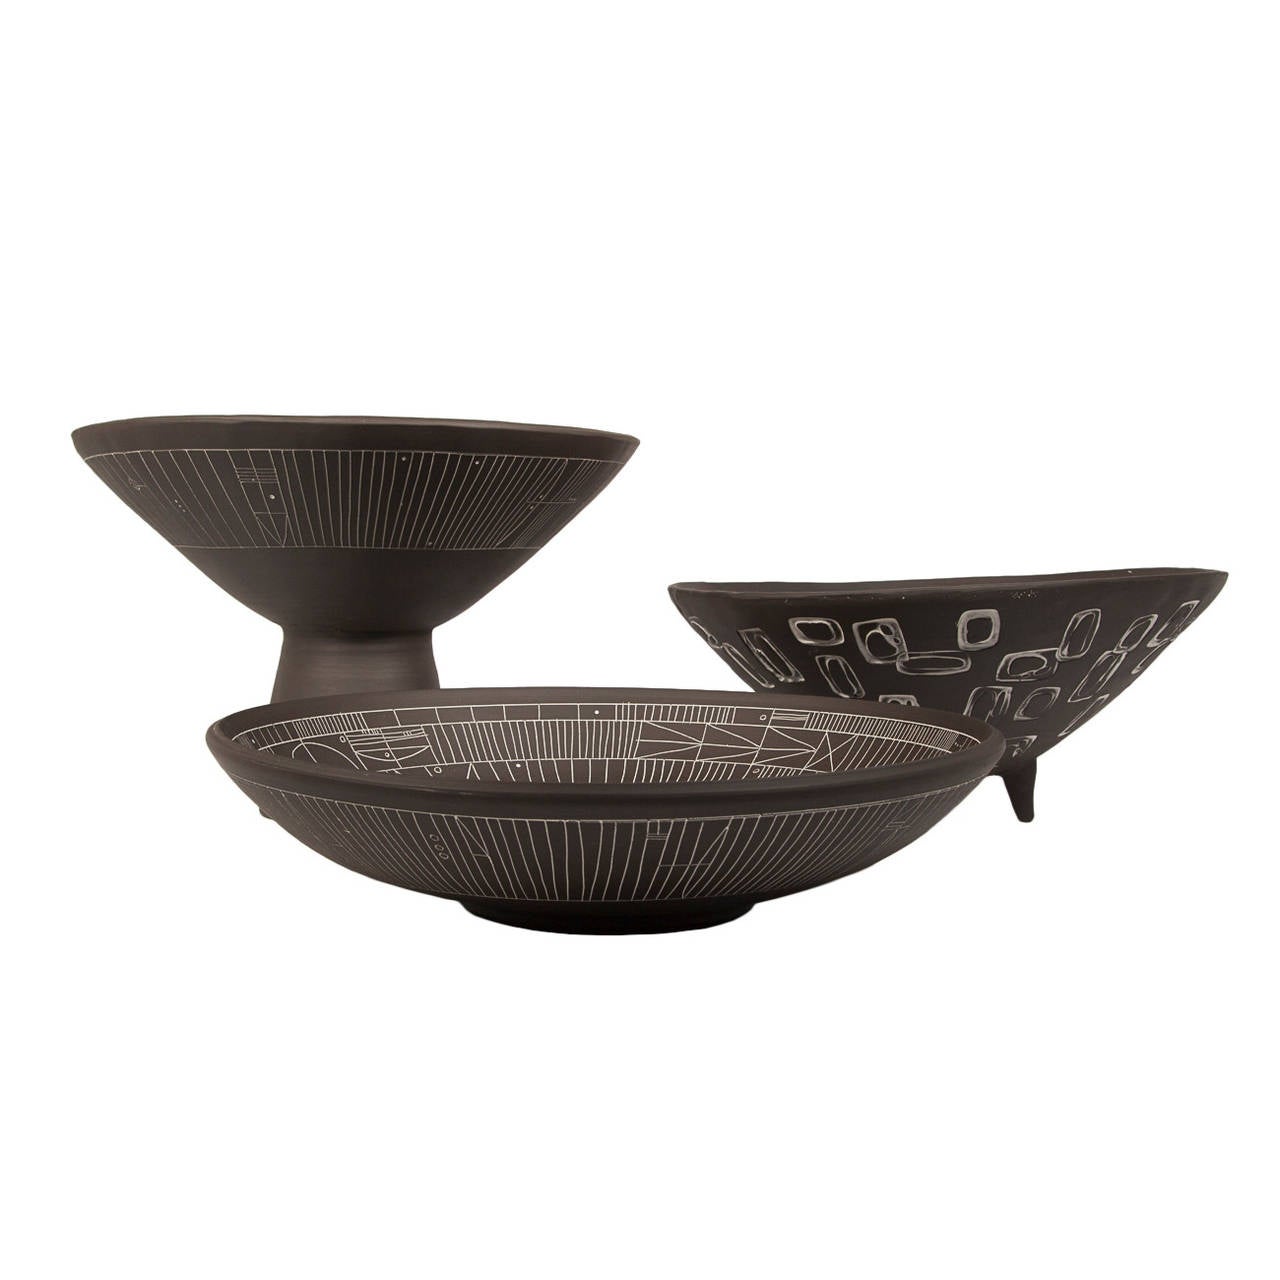 A trio of large incised black and white “Scribe” ceramic bowls by LA artist Heather Rosenman. Individually carved, so no two are alike. Decorative purpose only. Signed by the artist. Can be purchase individually.

Measures: Pedestal bowl (Left):